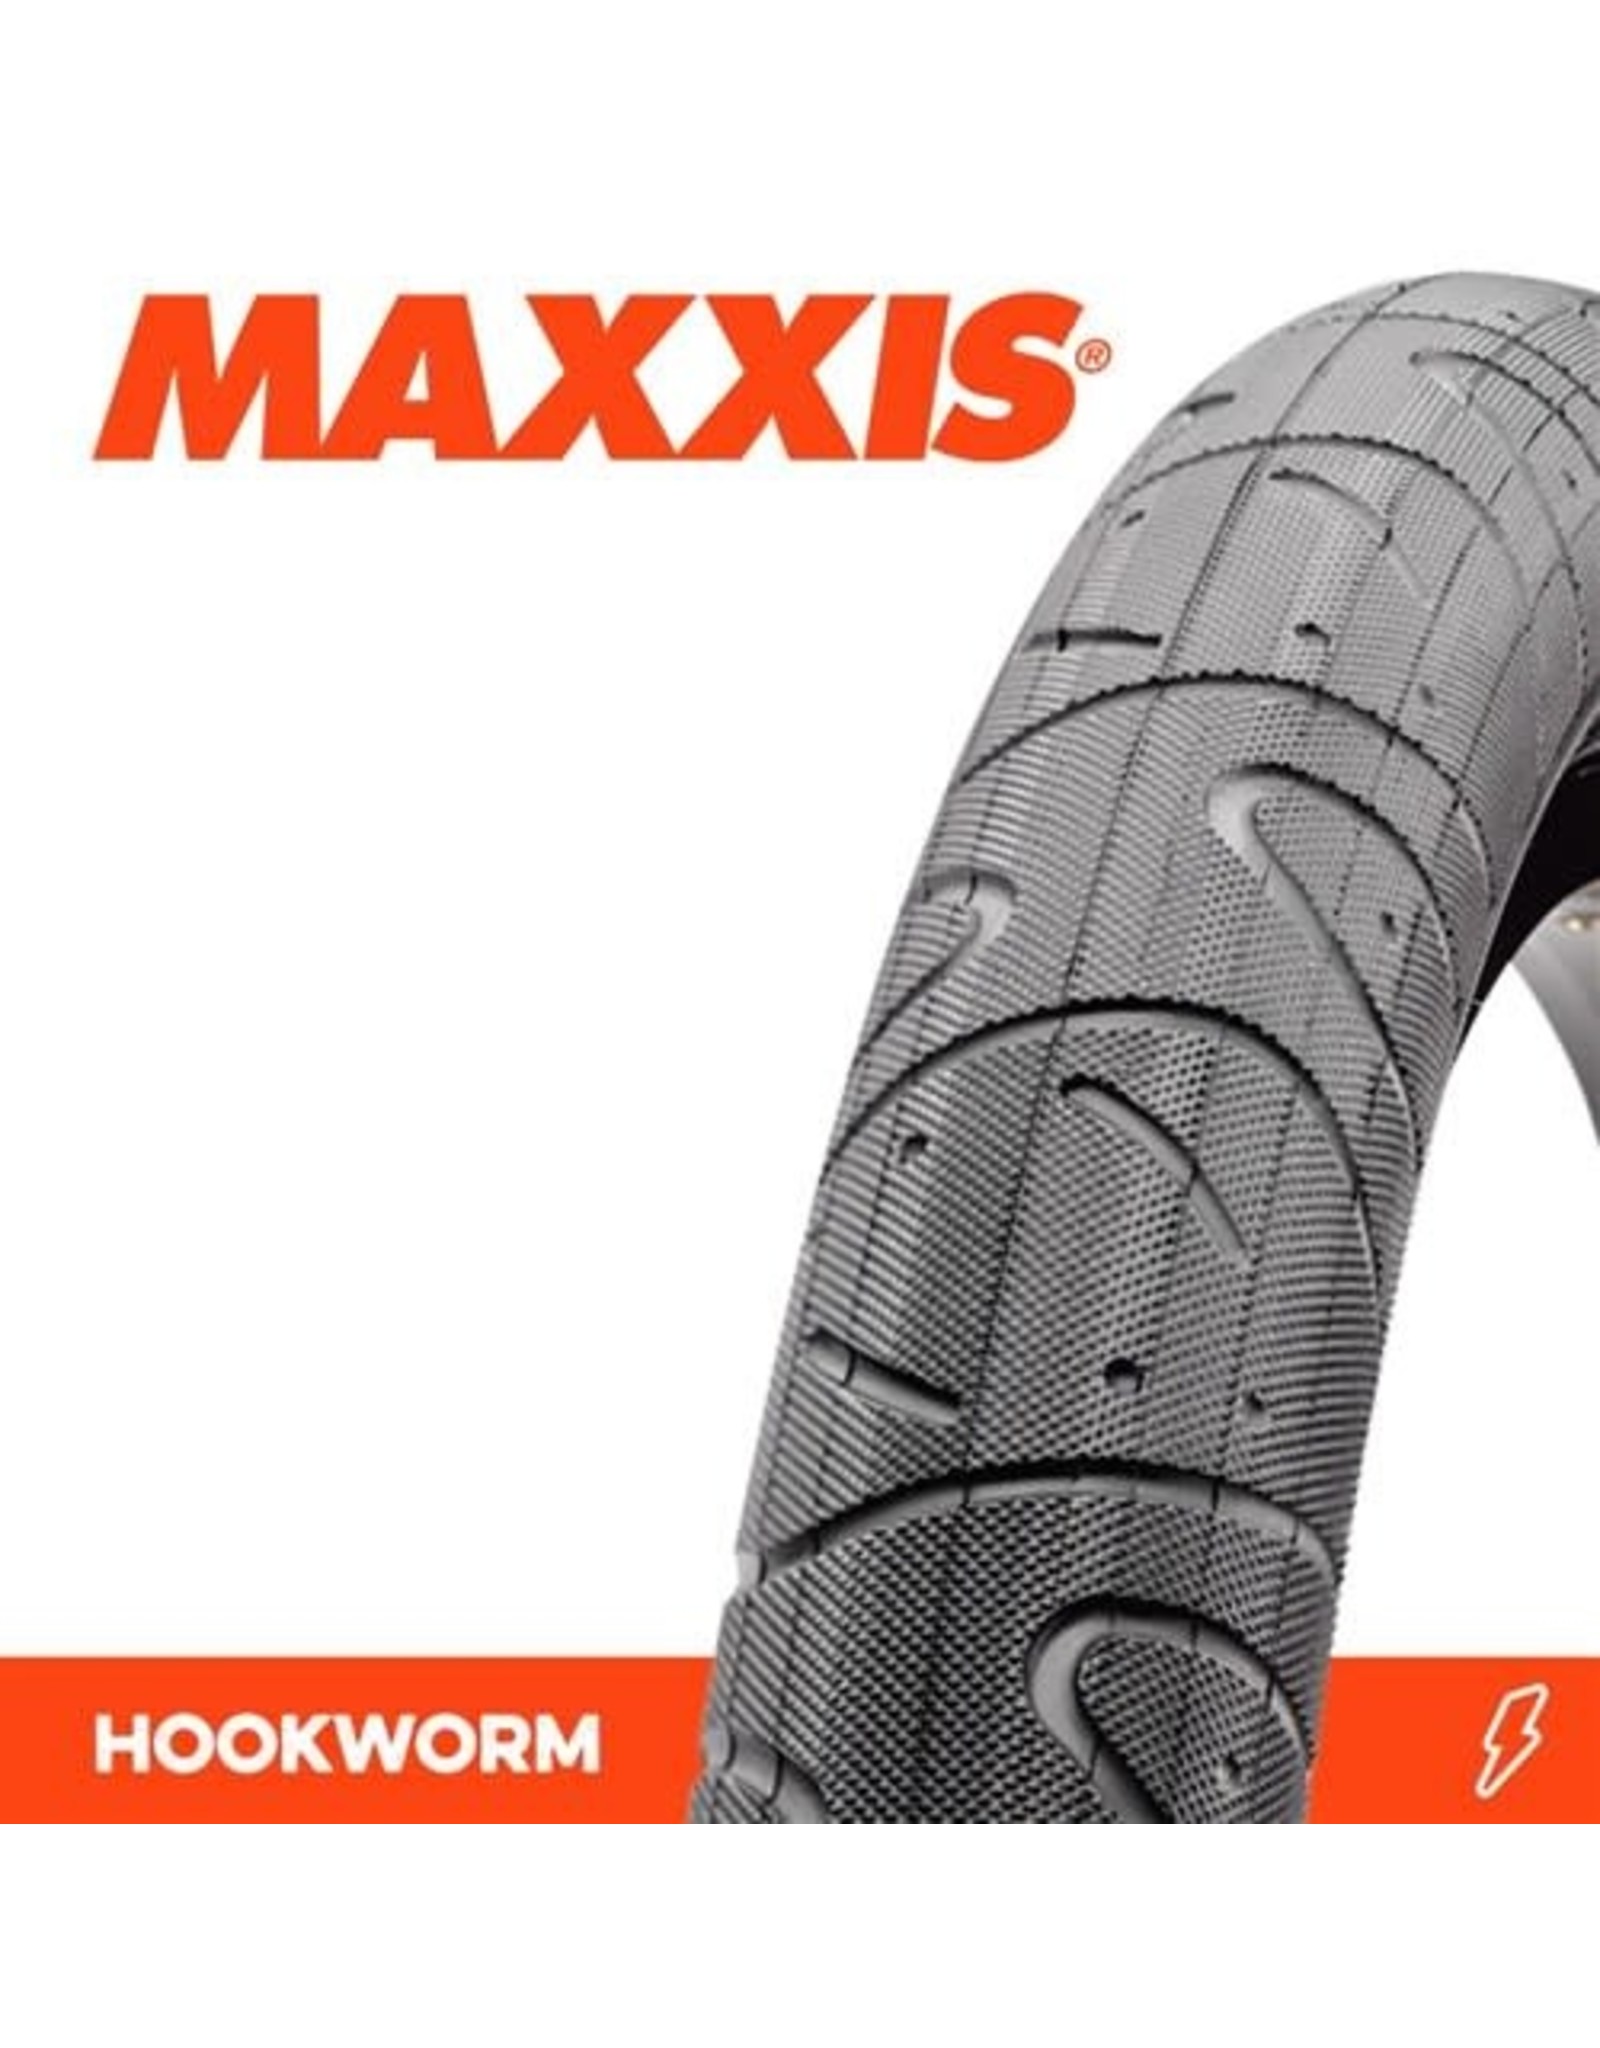 MAXXIS MAXXIS HOOKWORM 29 X 2.50” WIRE TYRE 60TPI - Bicycle Tech Bar